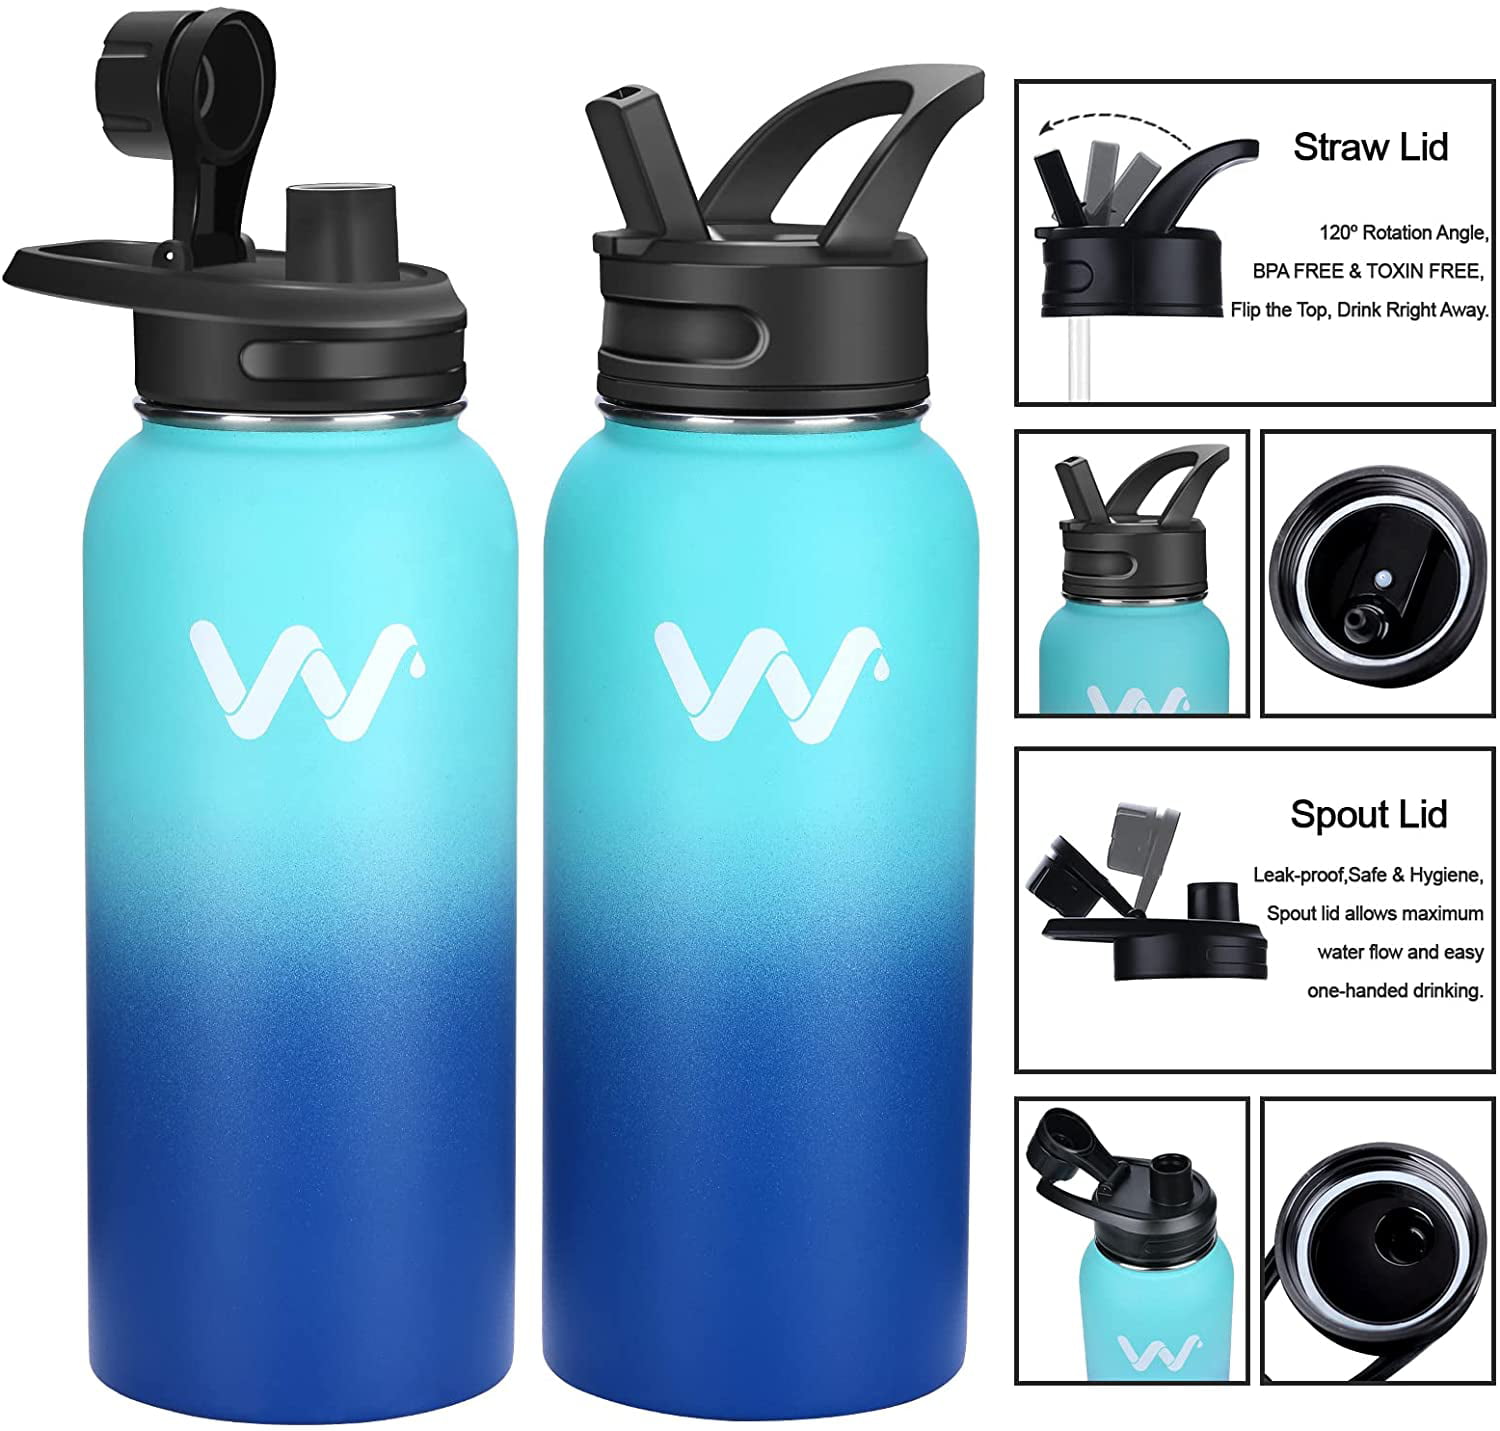 Hydro Flask 32oz New Water Cup, Leak Proof Straw Cover - Stainless Steel Water Bottle - Vacuum Insulation, Various Colors Peaceful Valley Color: Cobal